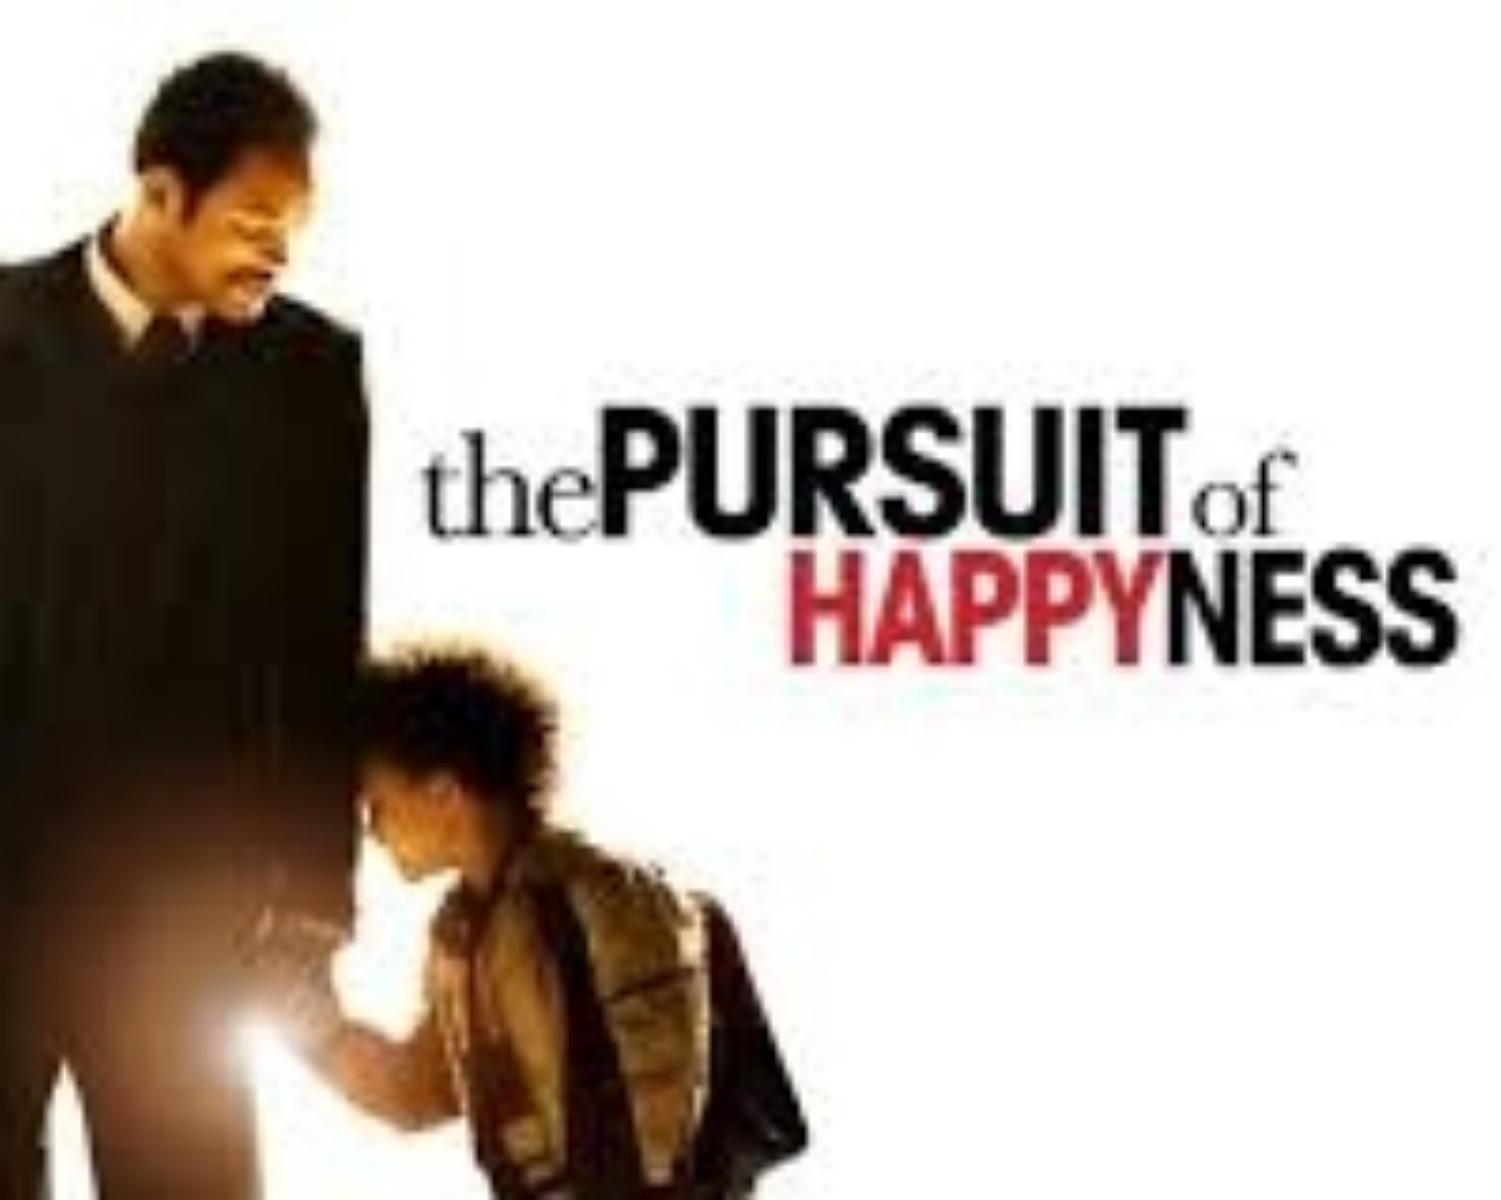 3. Pursuit Of Happiness Leads To More Depression And Anxiety.